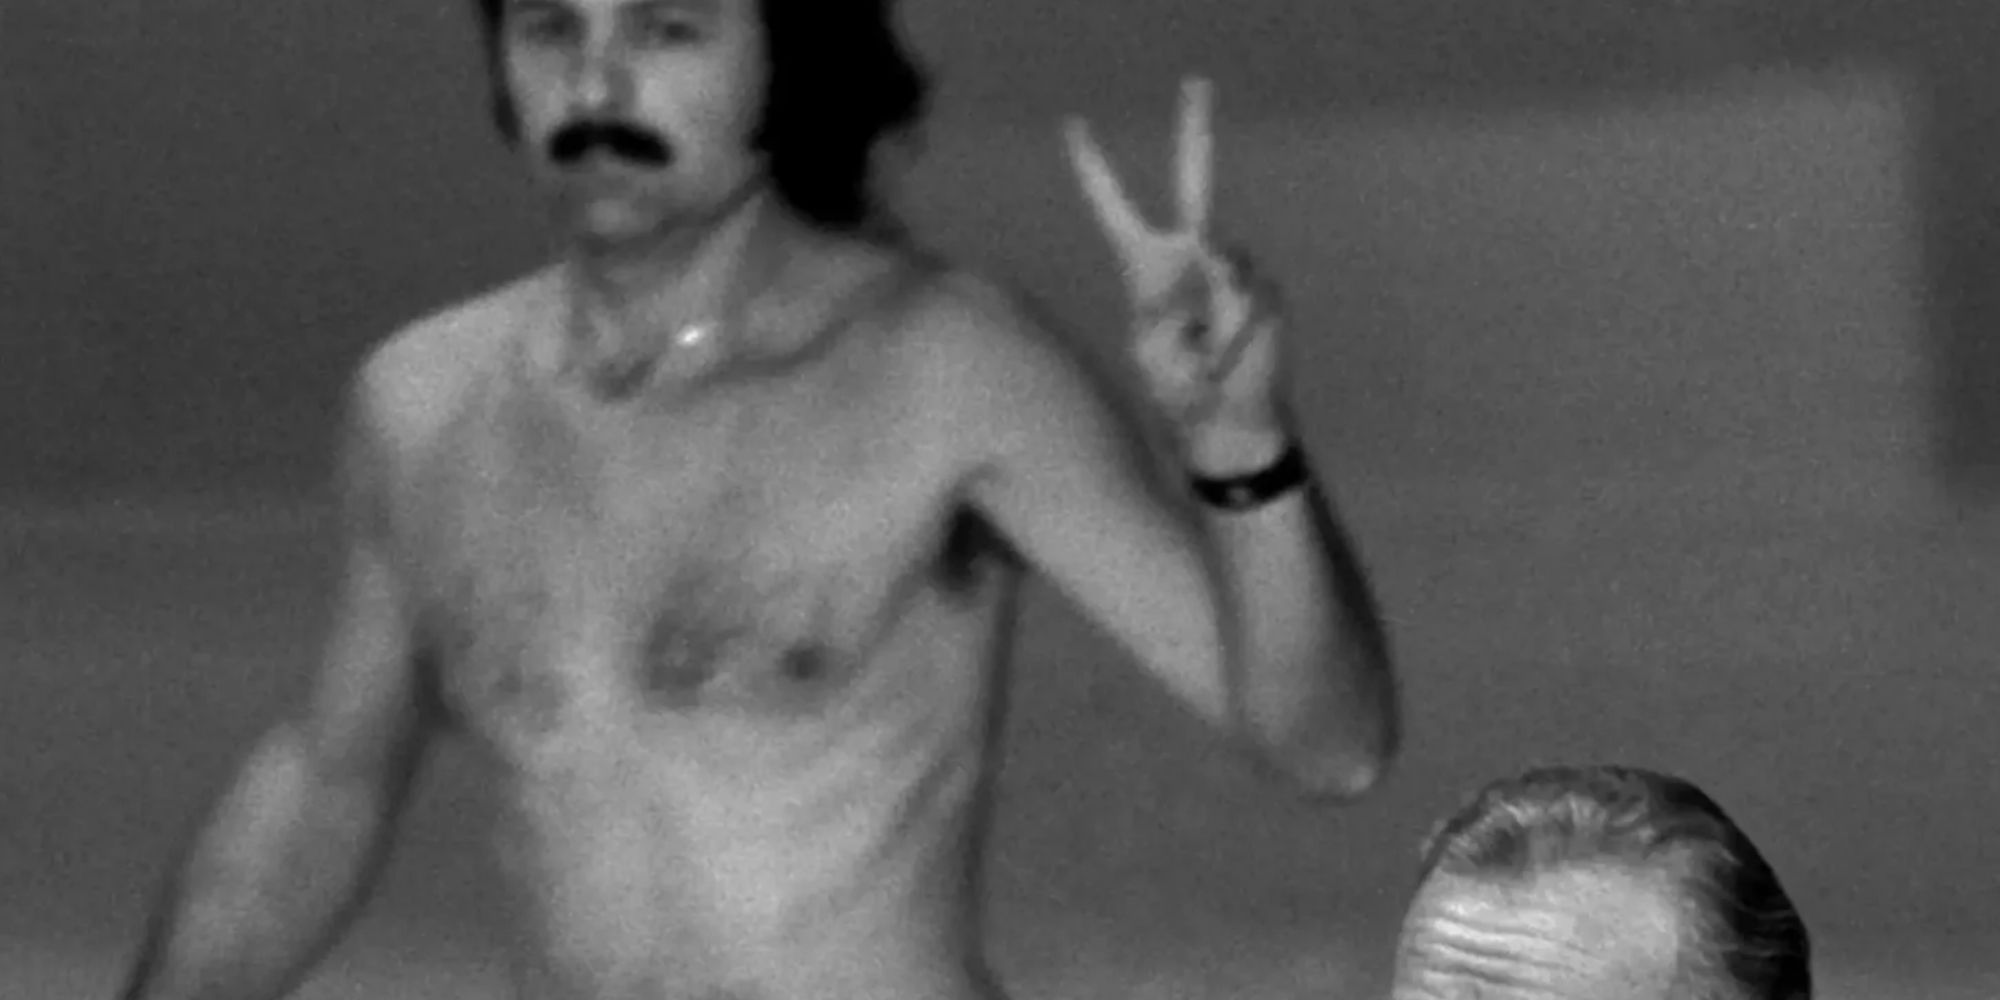 Shirtless man flashing peace sign; at bottom left of frame, forhead of man, rest of body is out of frame, 